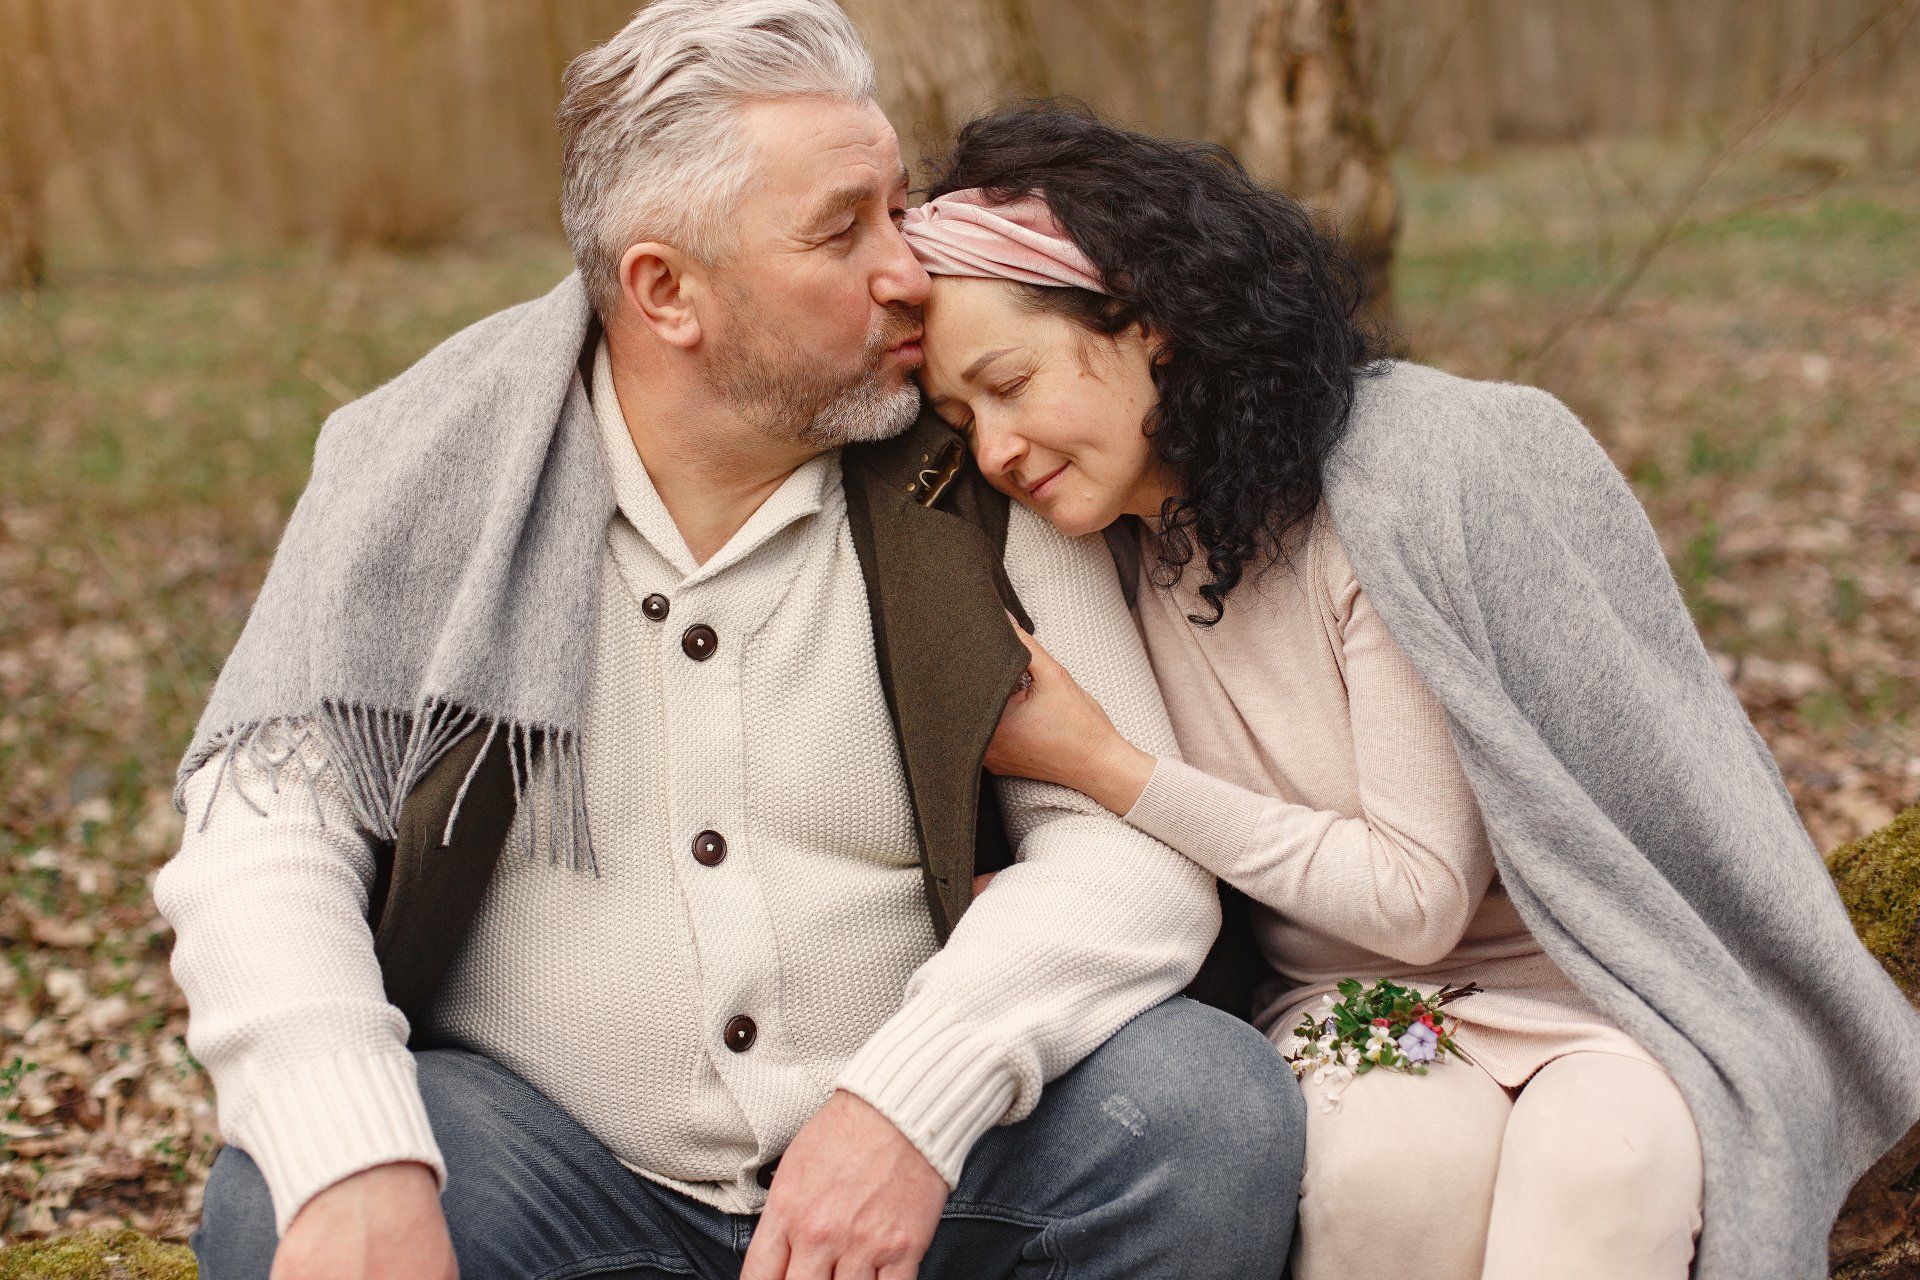 Outdoor fall photo of a middle-aged couple